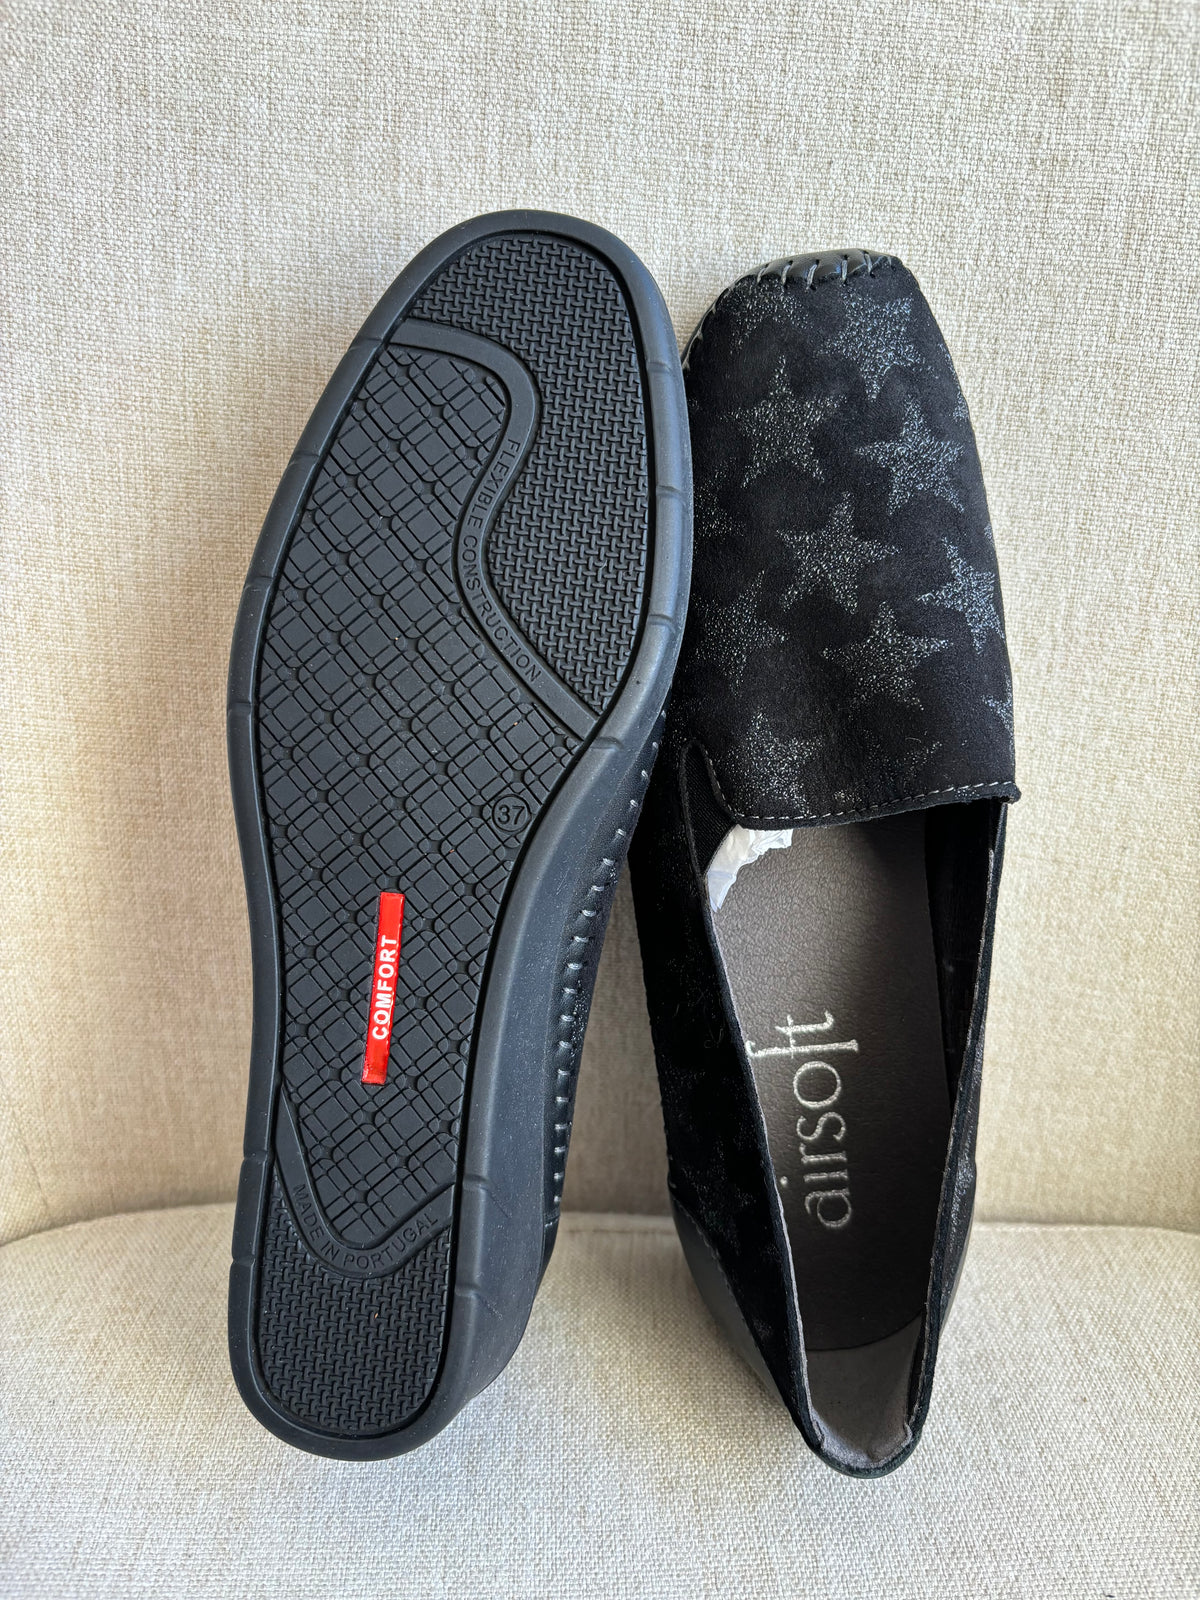 Black star sued loafers by Airsoft - Creation L